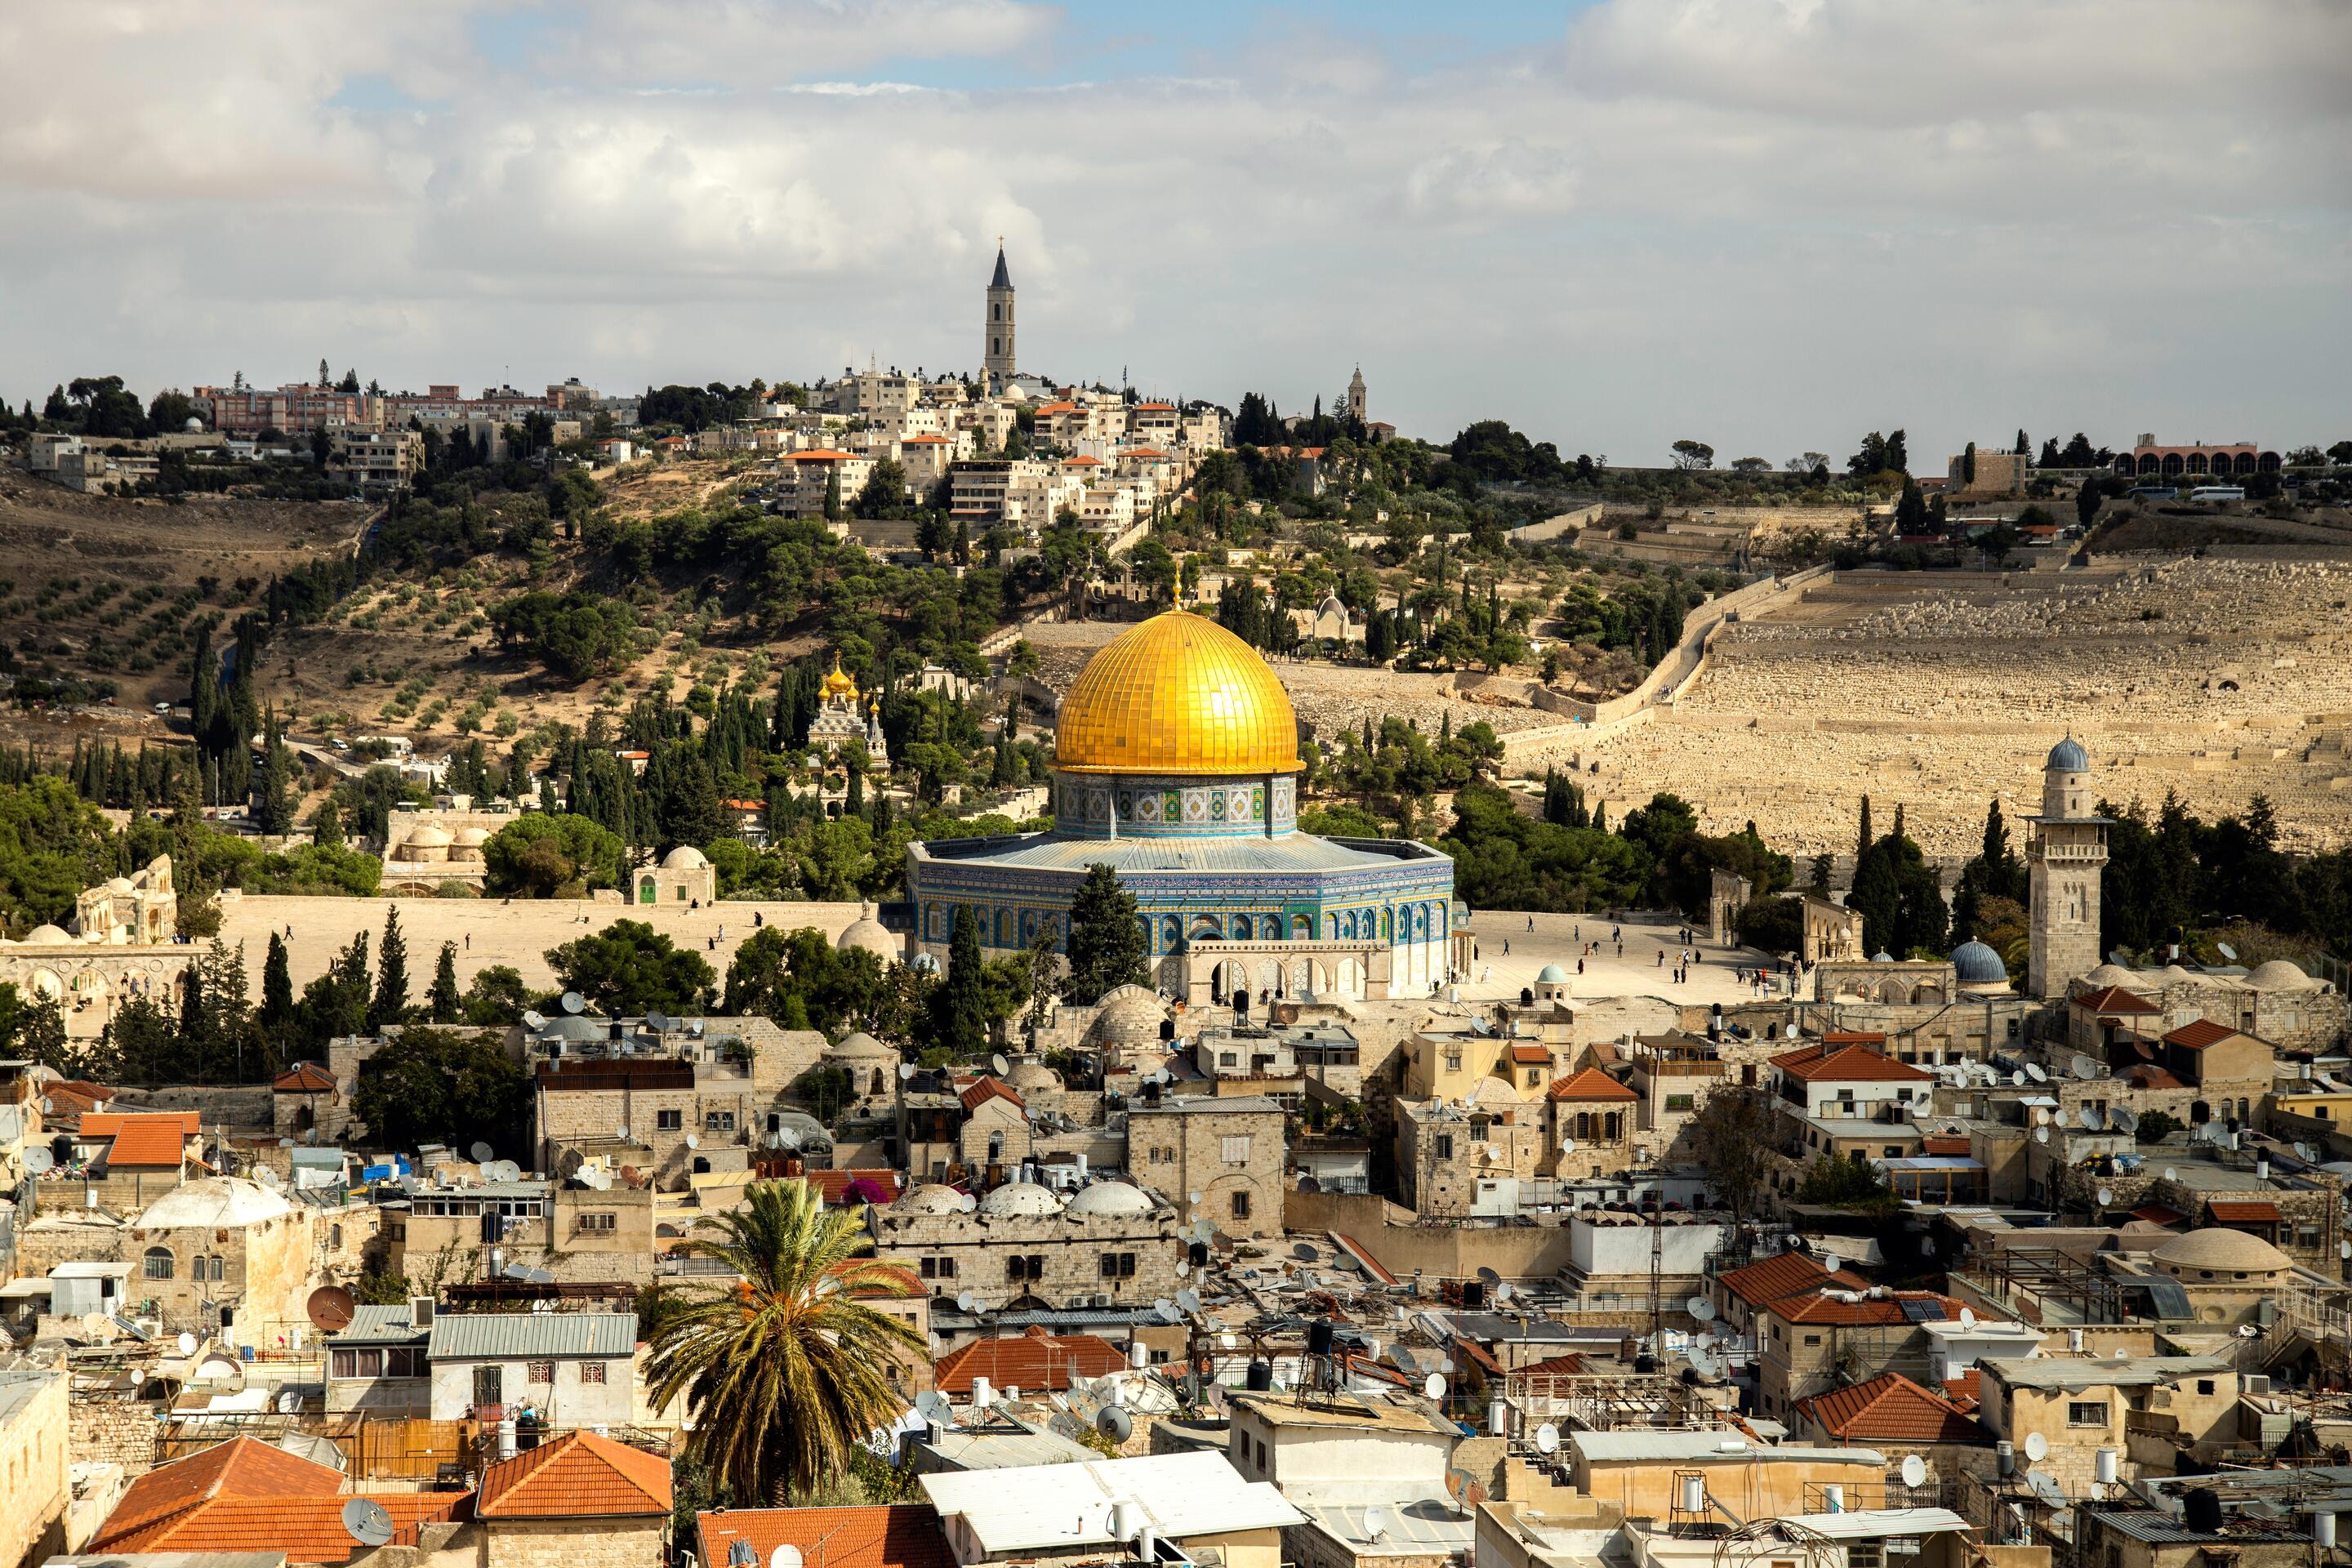 Gold Dome in Israel